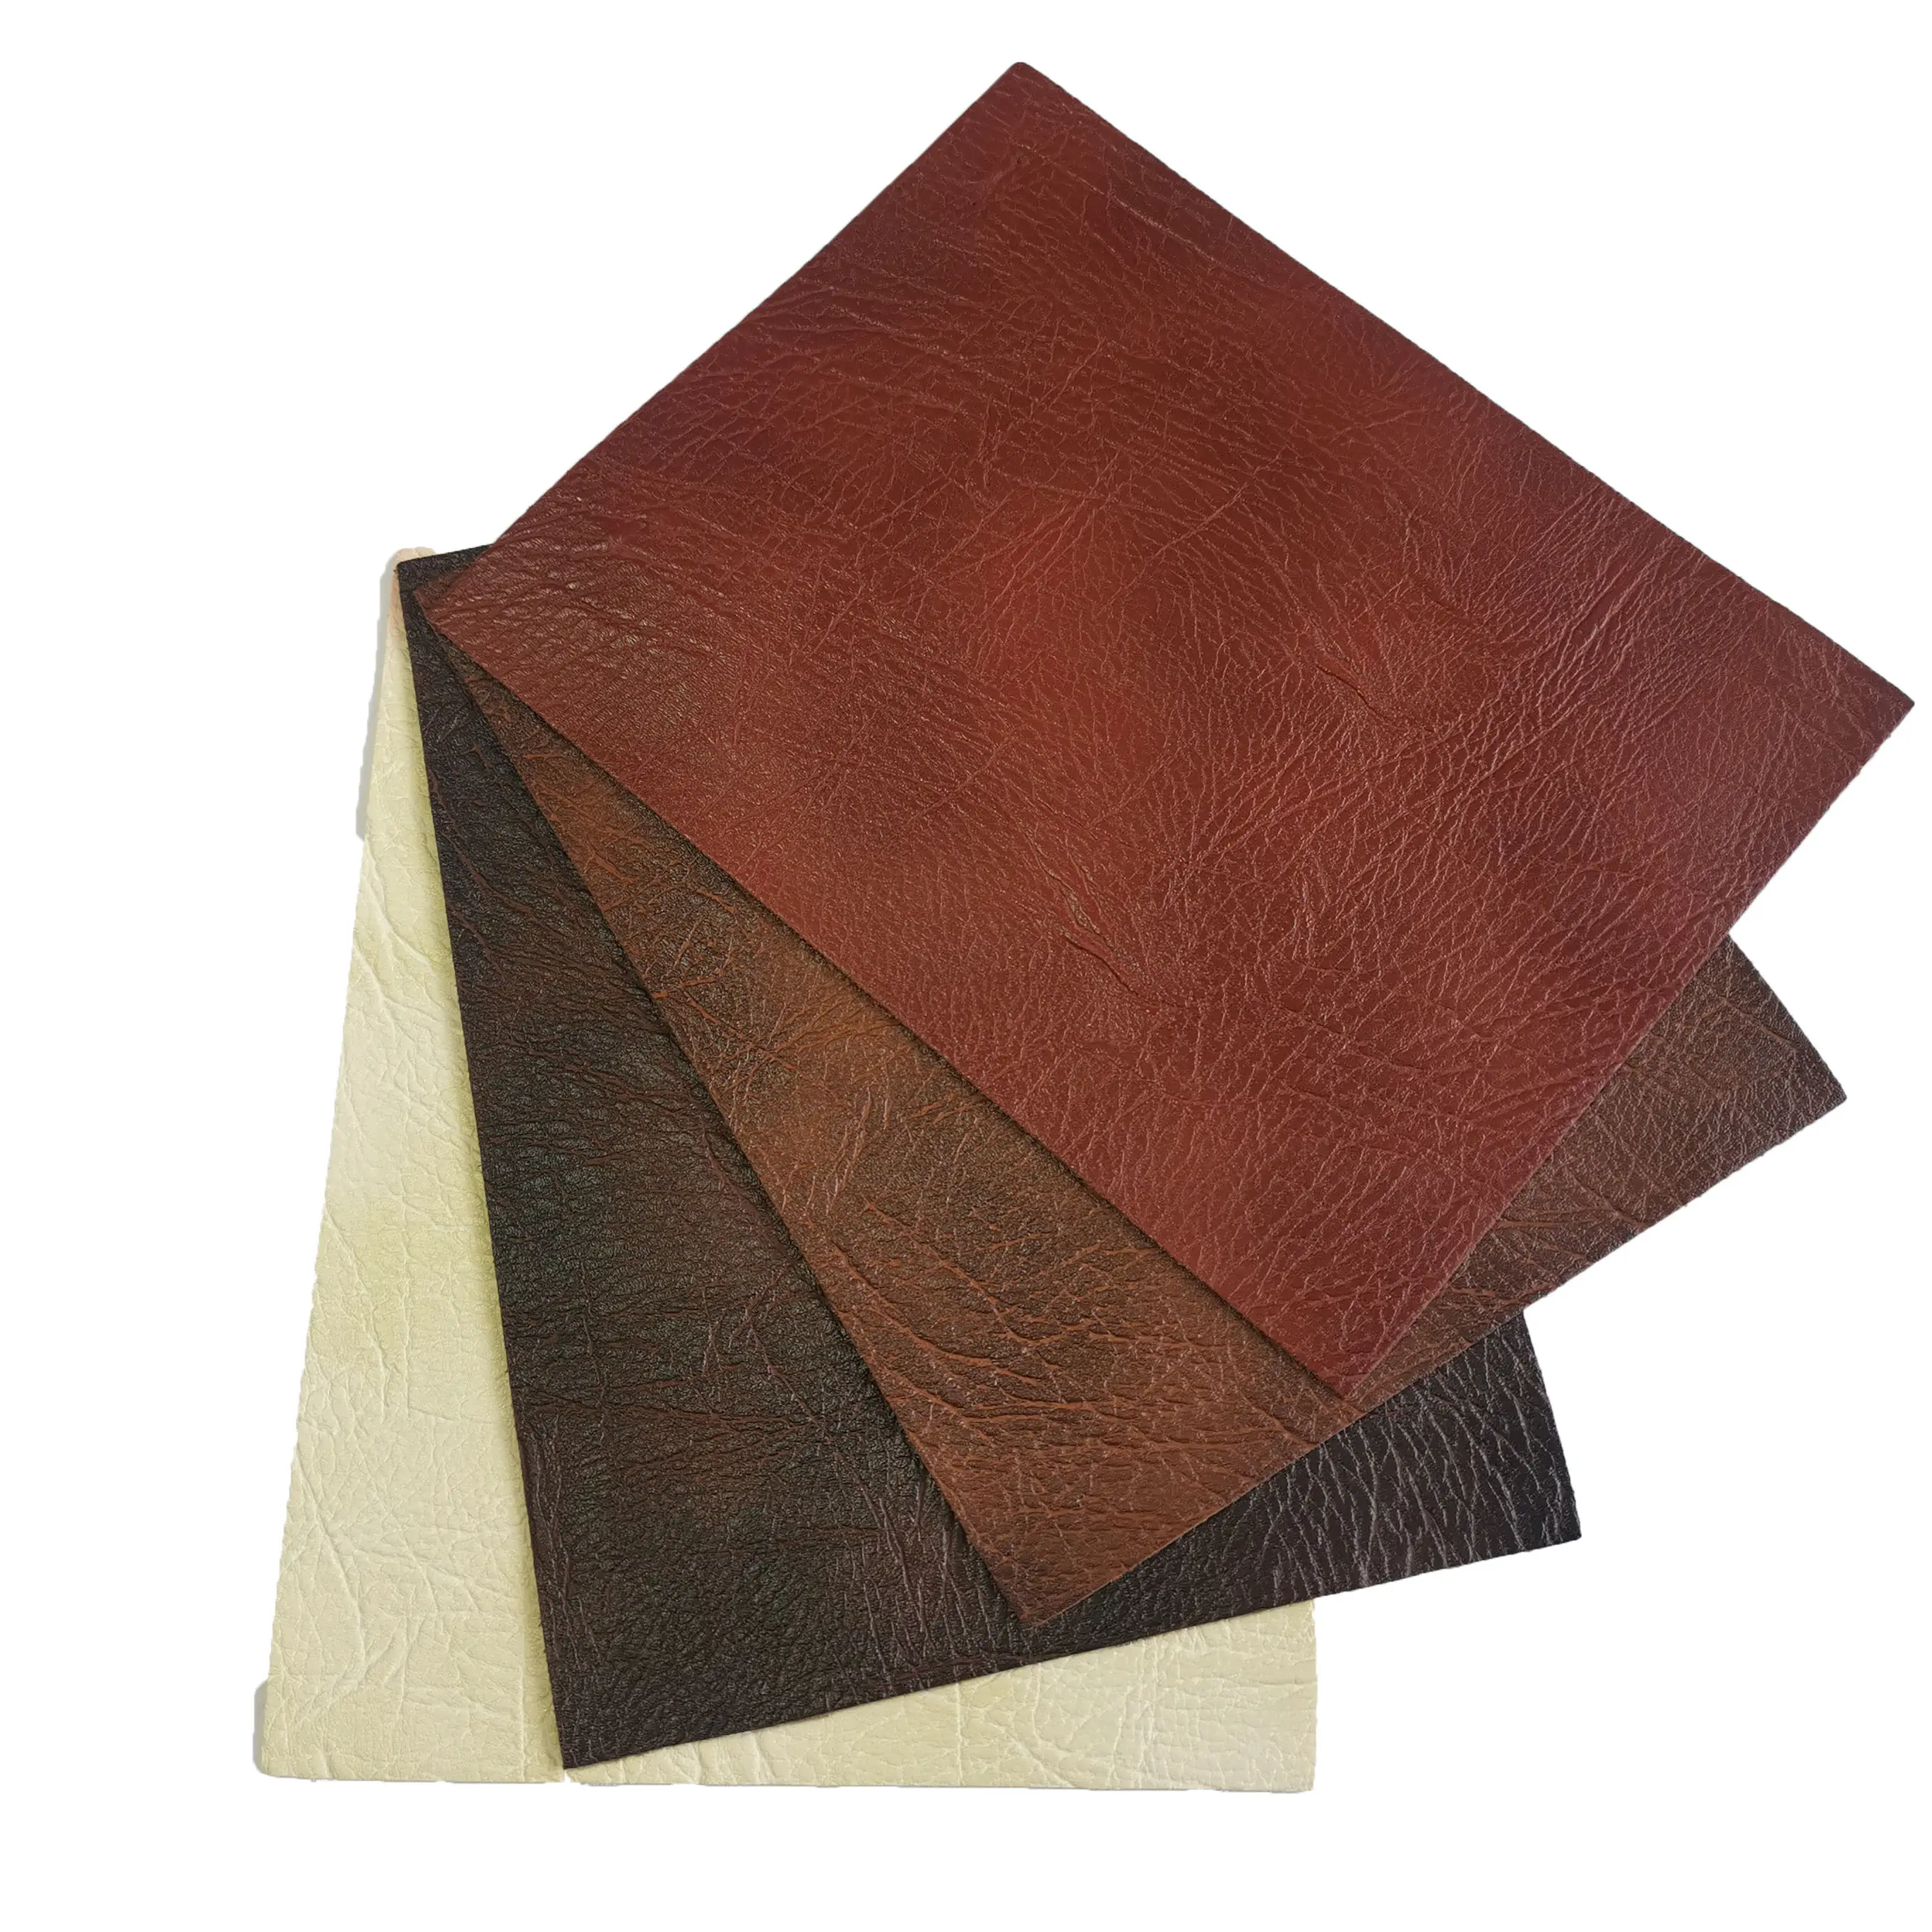 Hot PVC Leather For Automotive Interiors, Sofa Leather and Home Textiles, PVC Faux Leather Fabric